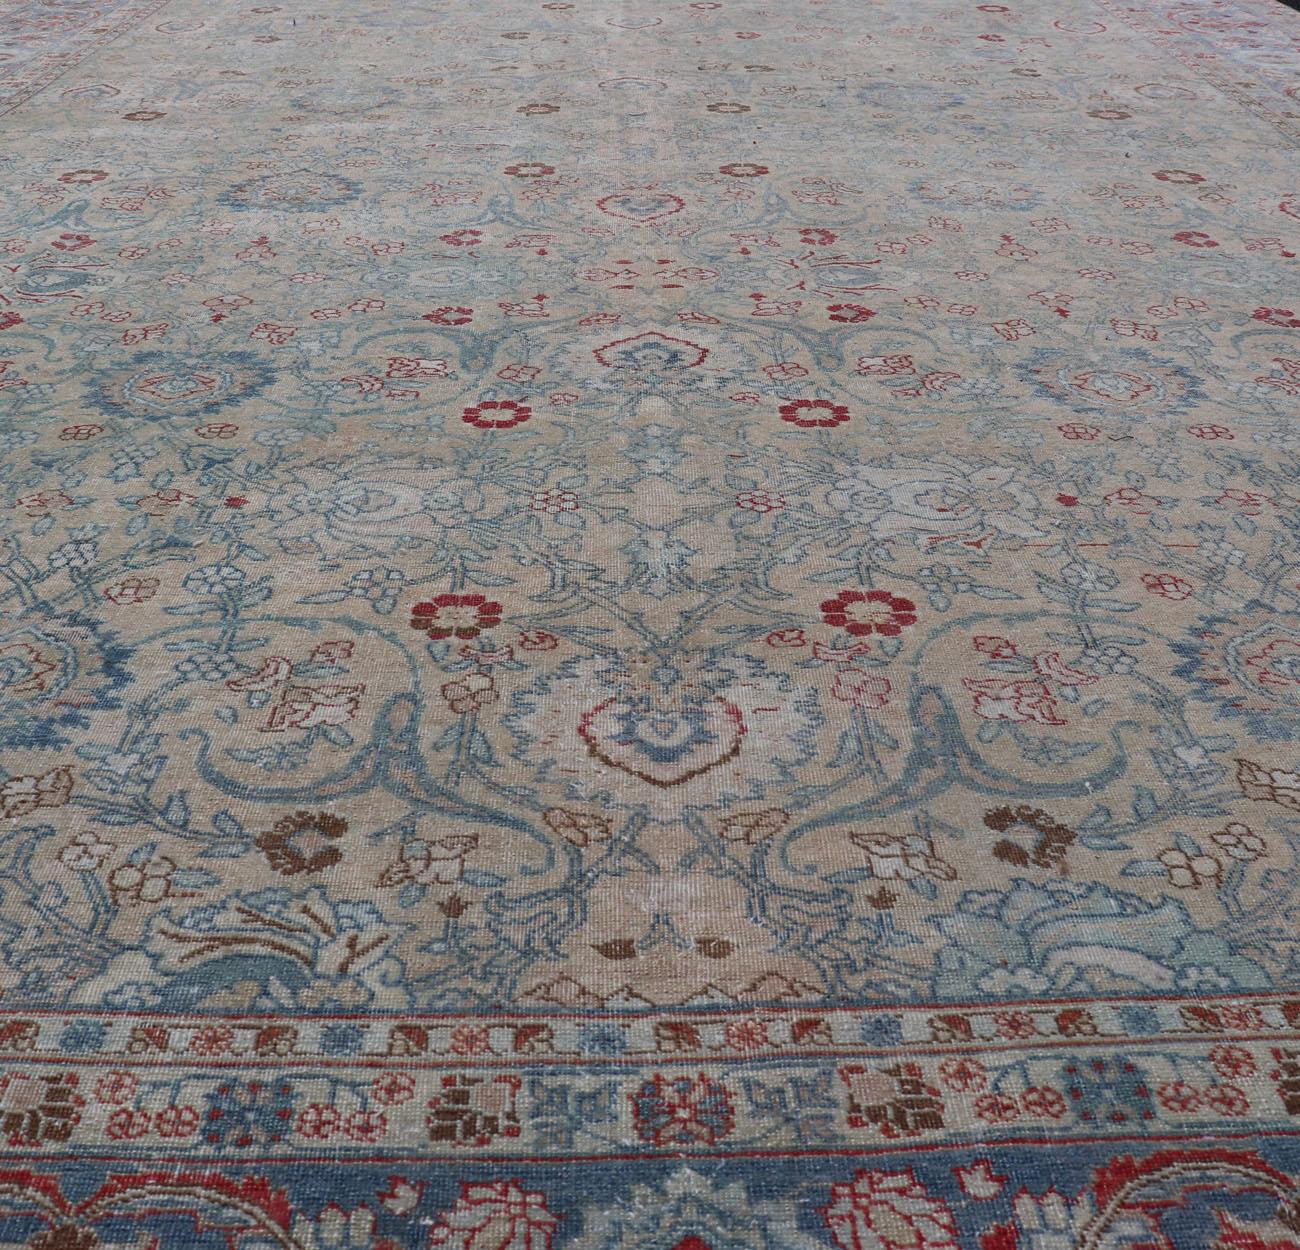  Antique Persian Khorassan Rug with Floral Design in Honey Cream & Dusty Blue In Good Condition For Sale In Atlanta, GA